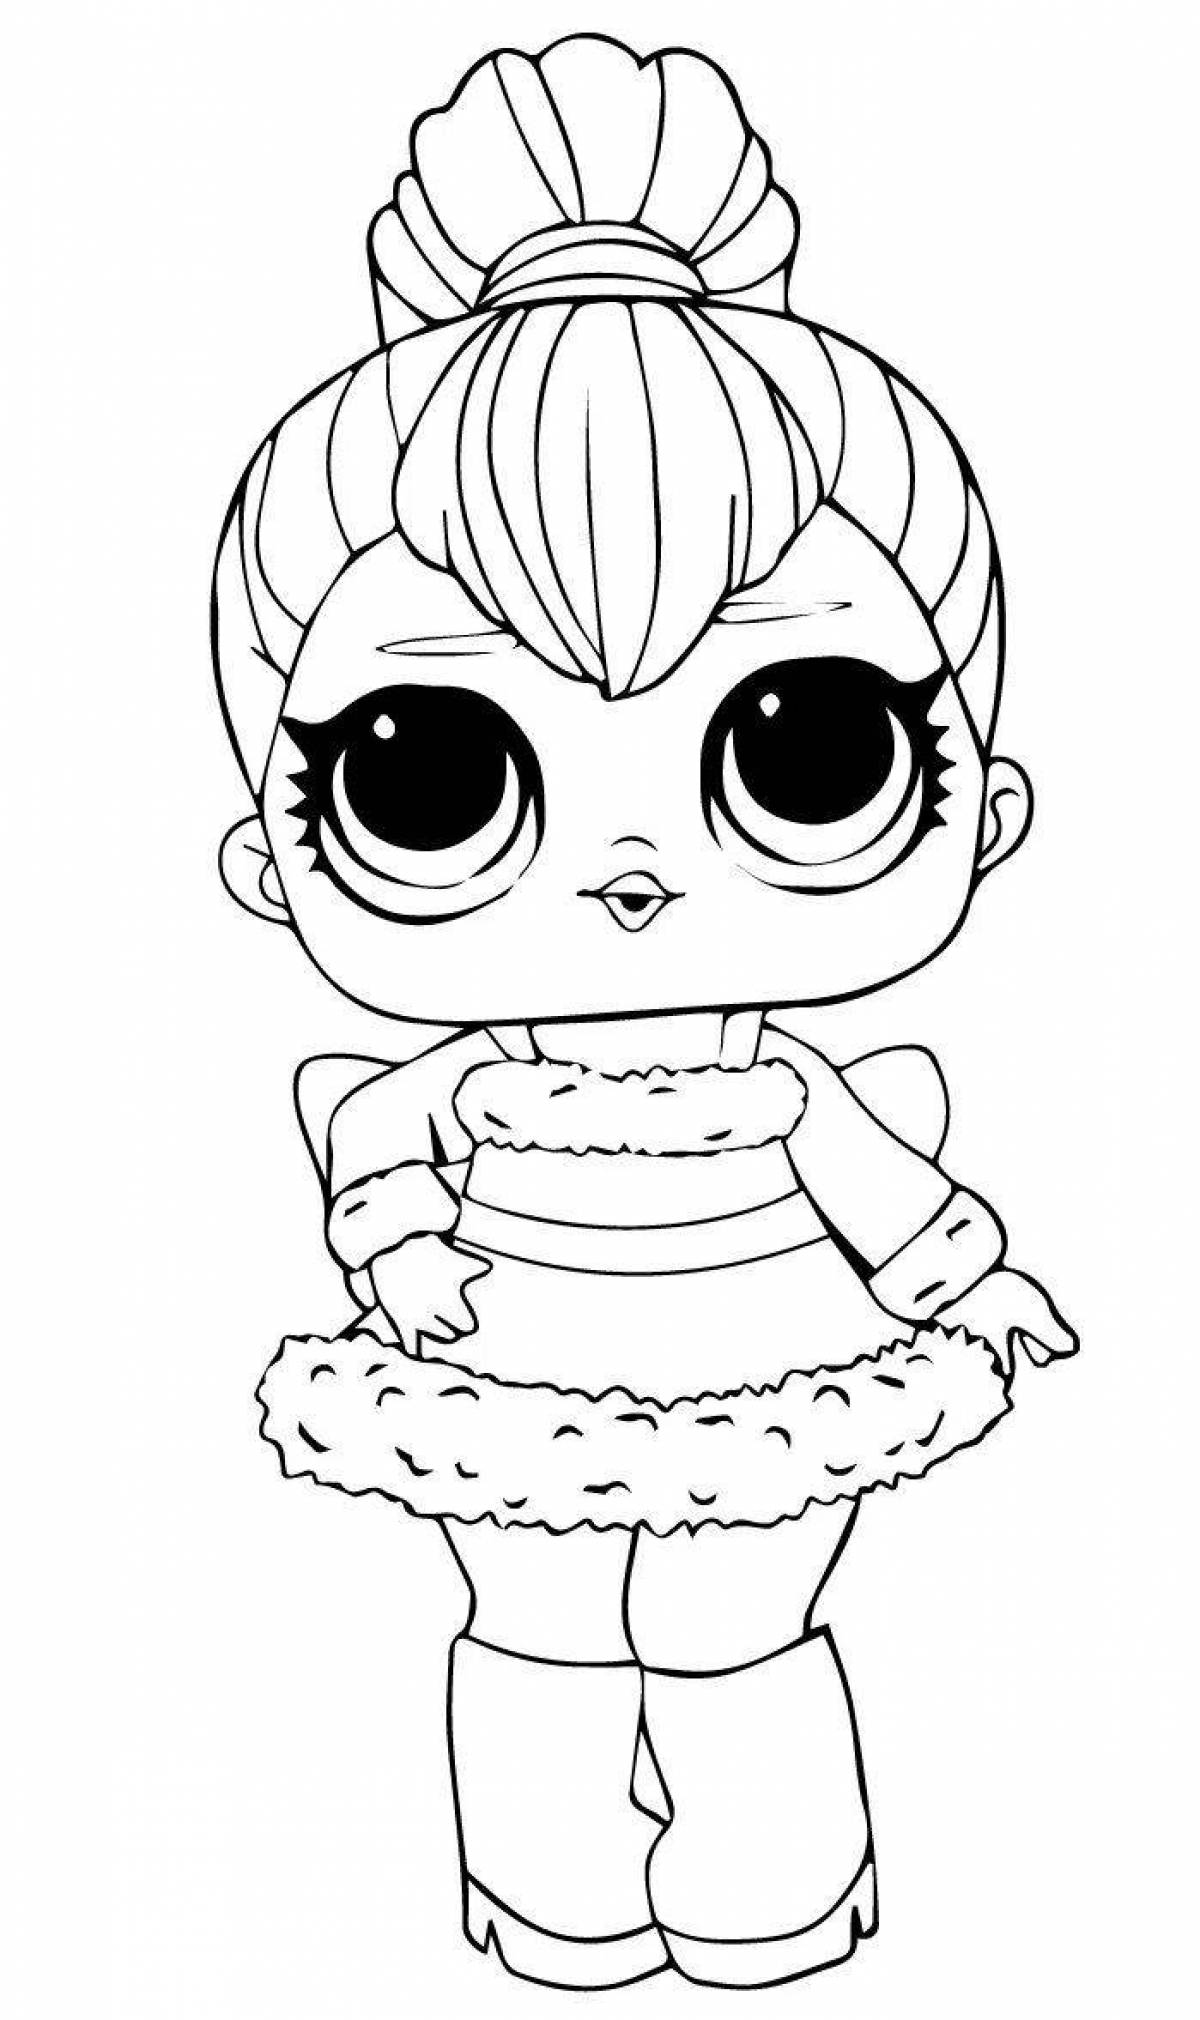 Radiant coloring page lol winter doll